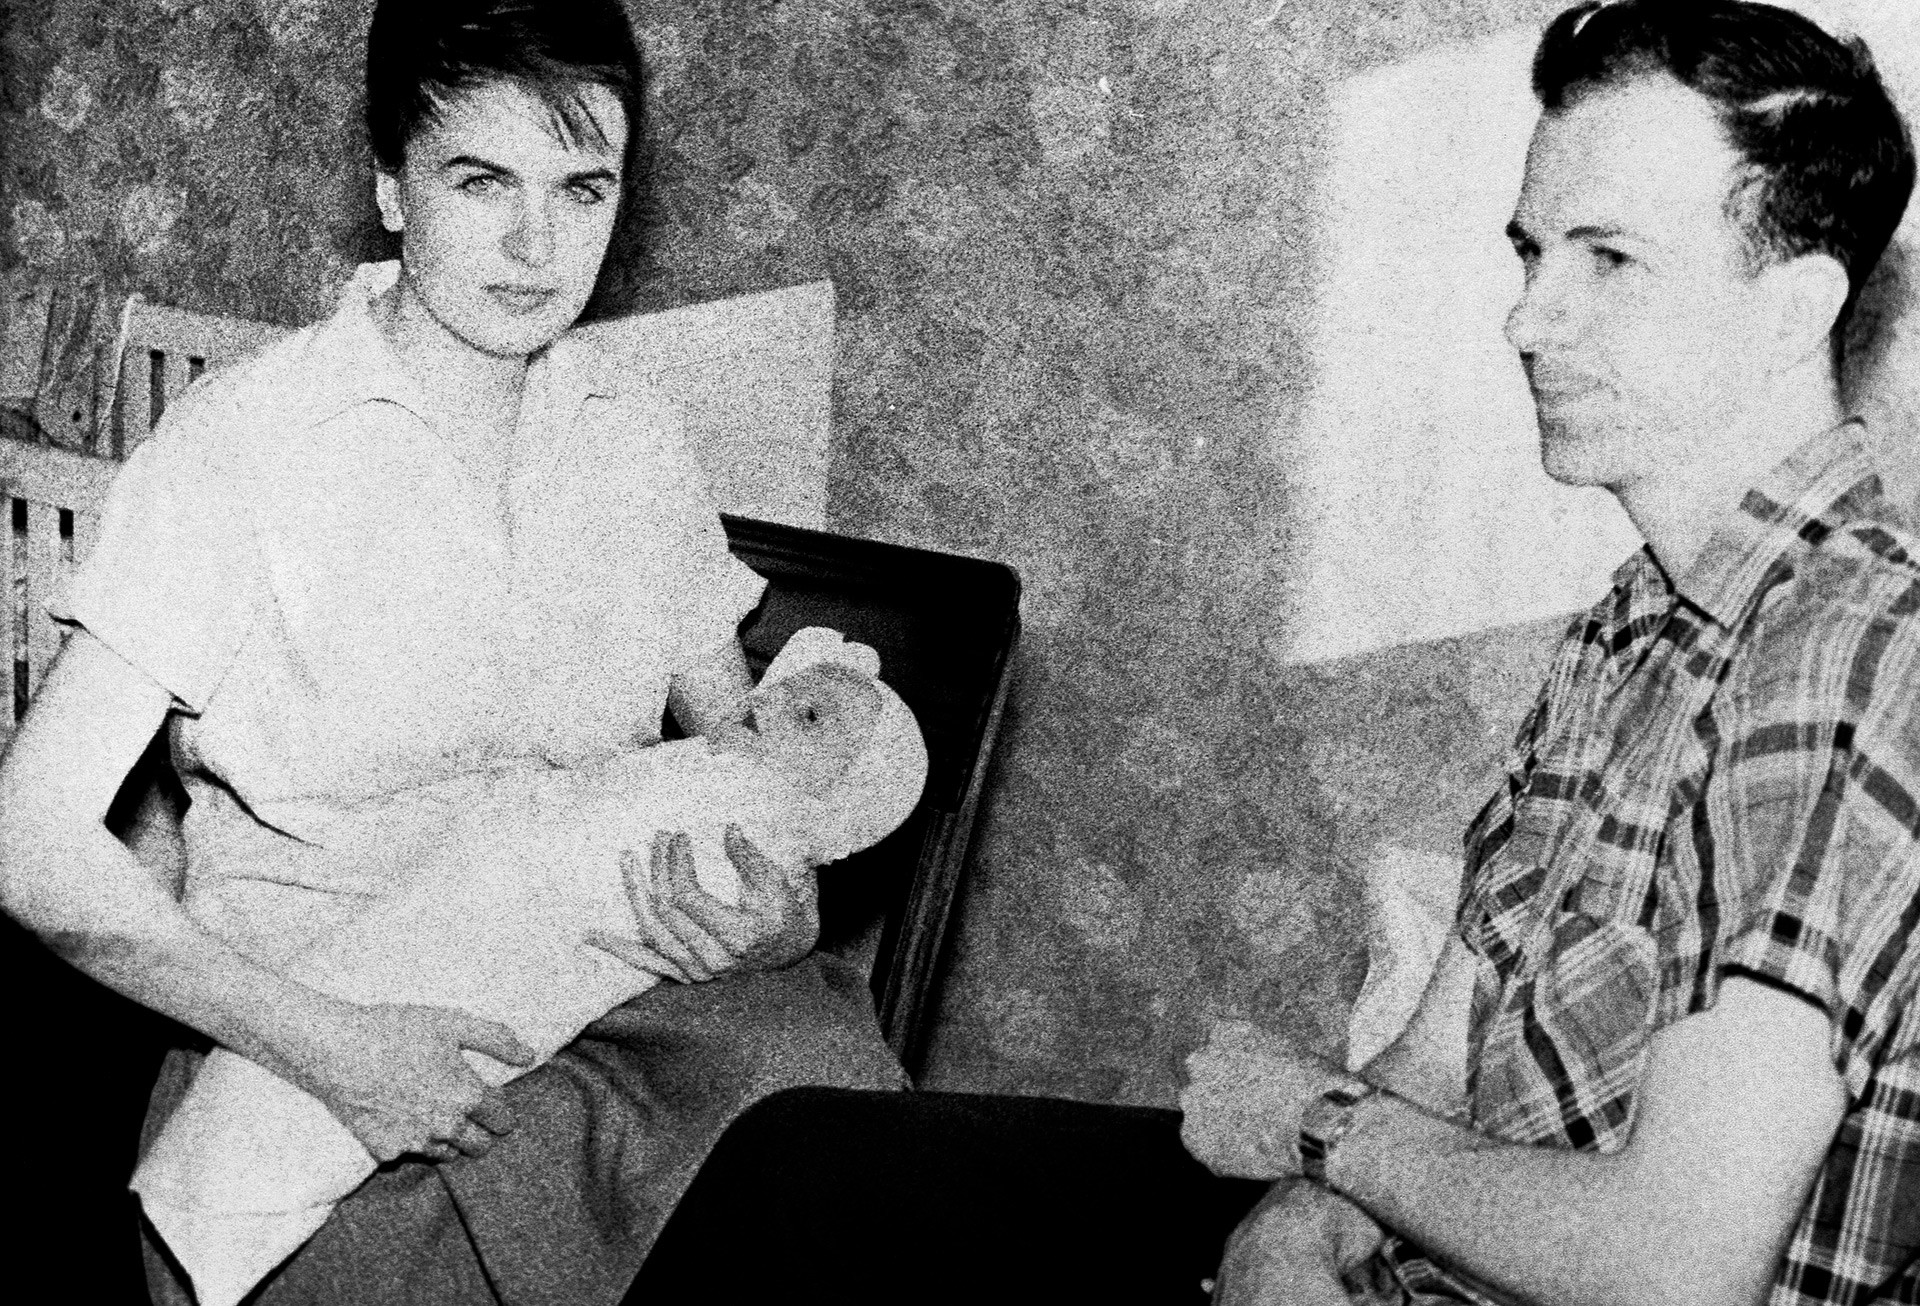 Lee Harvey Oswald, his wife Marina, and his daughter June Lee, while living in Minsk.